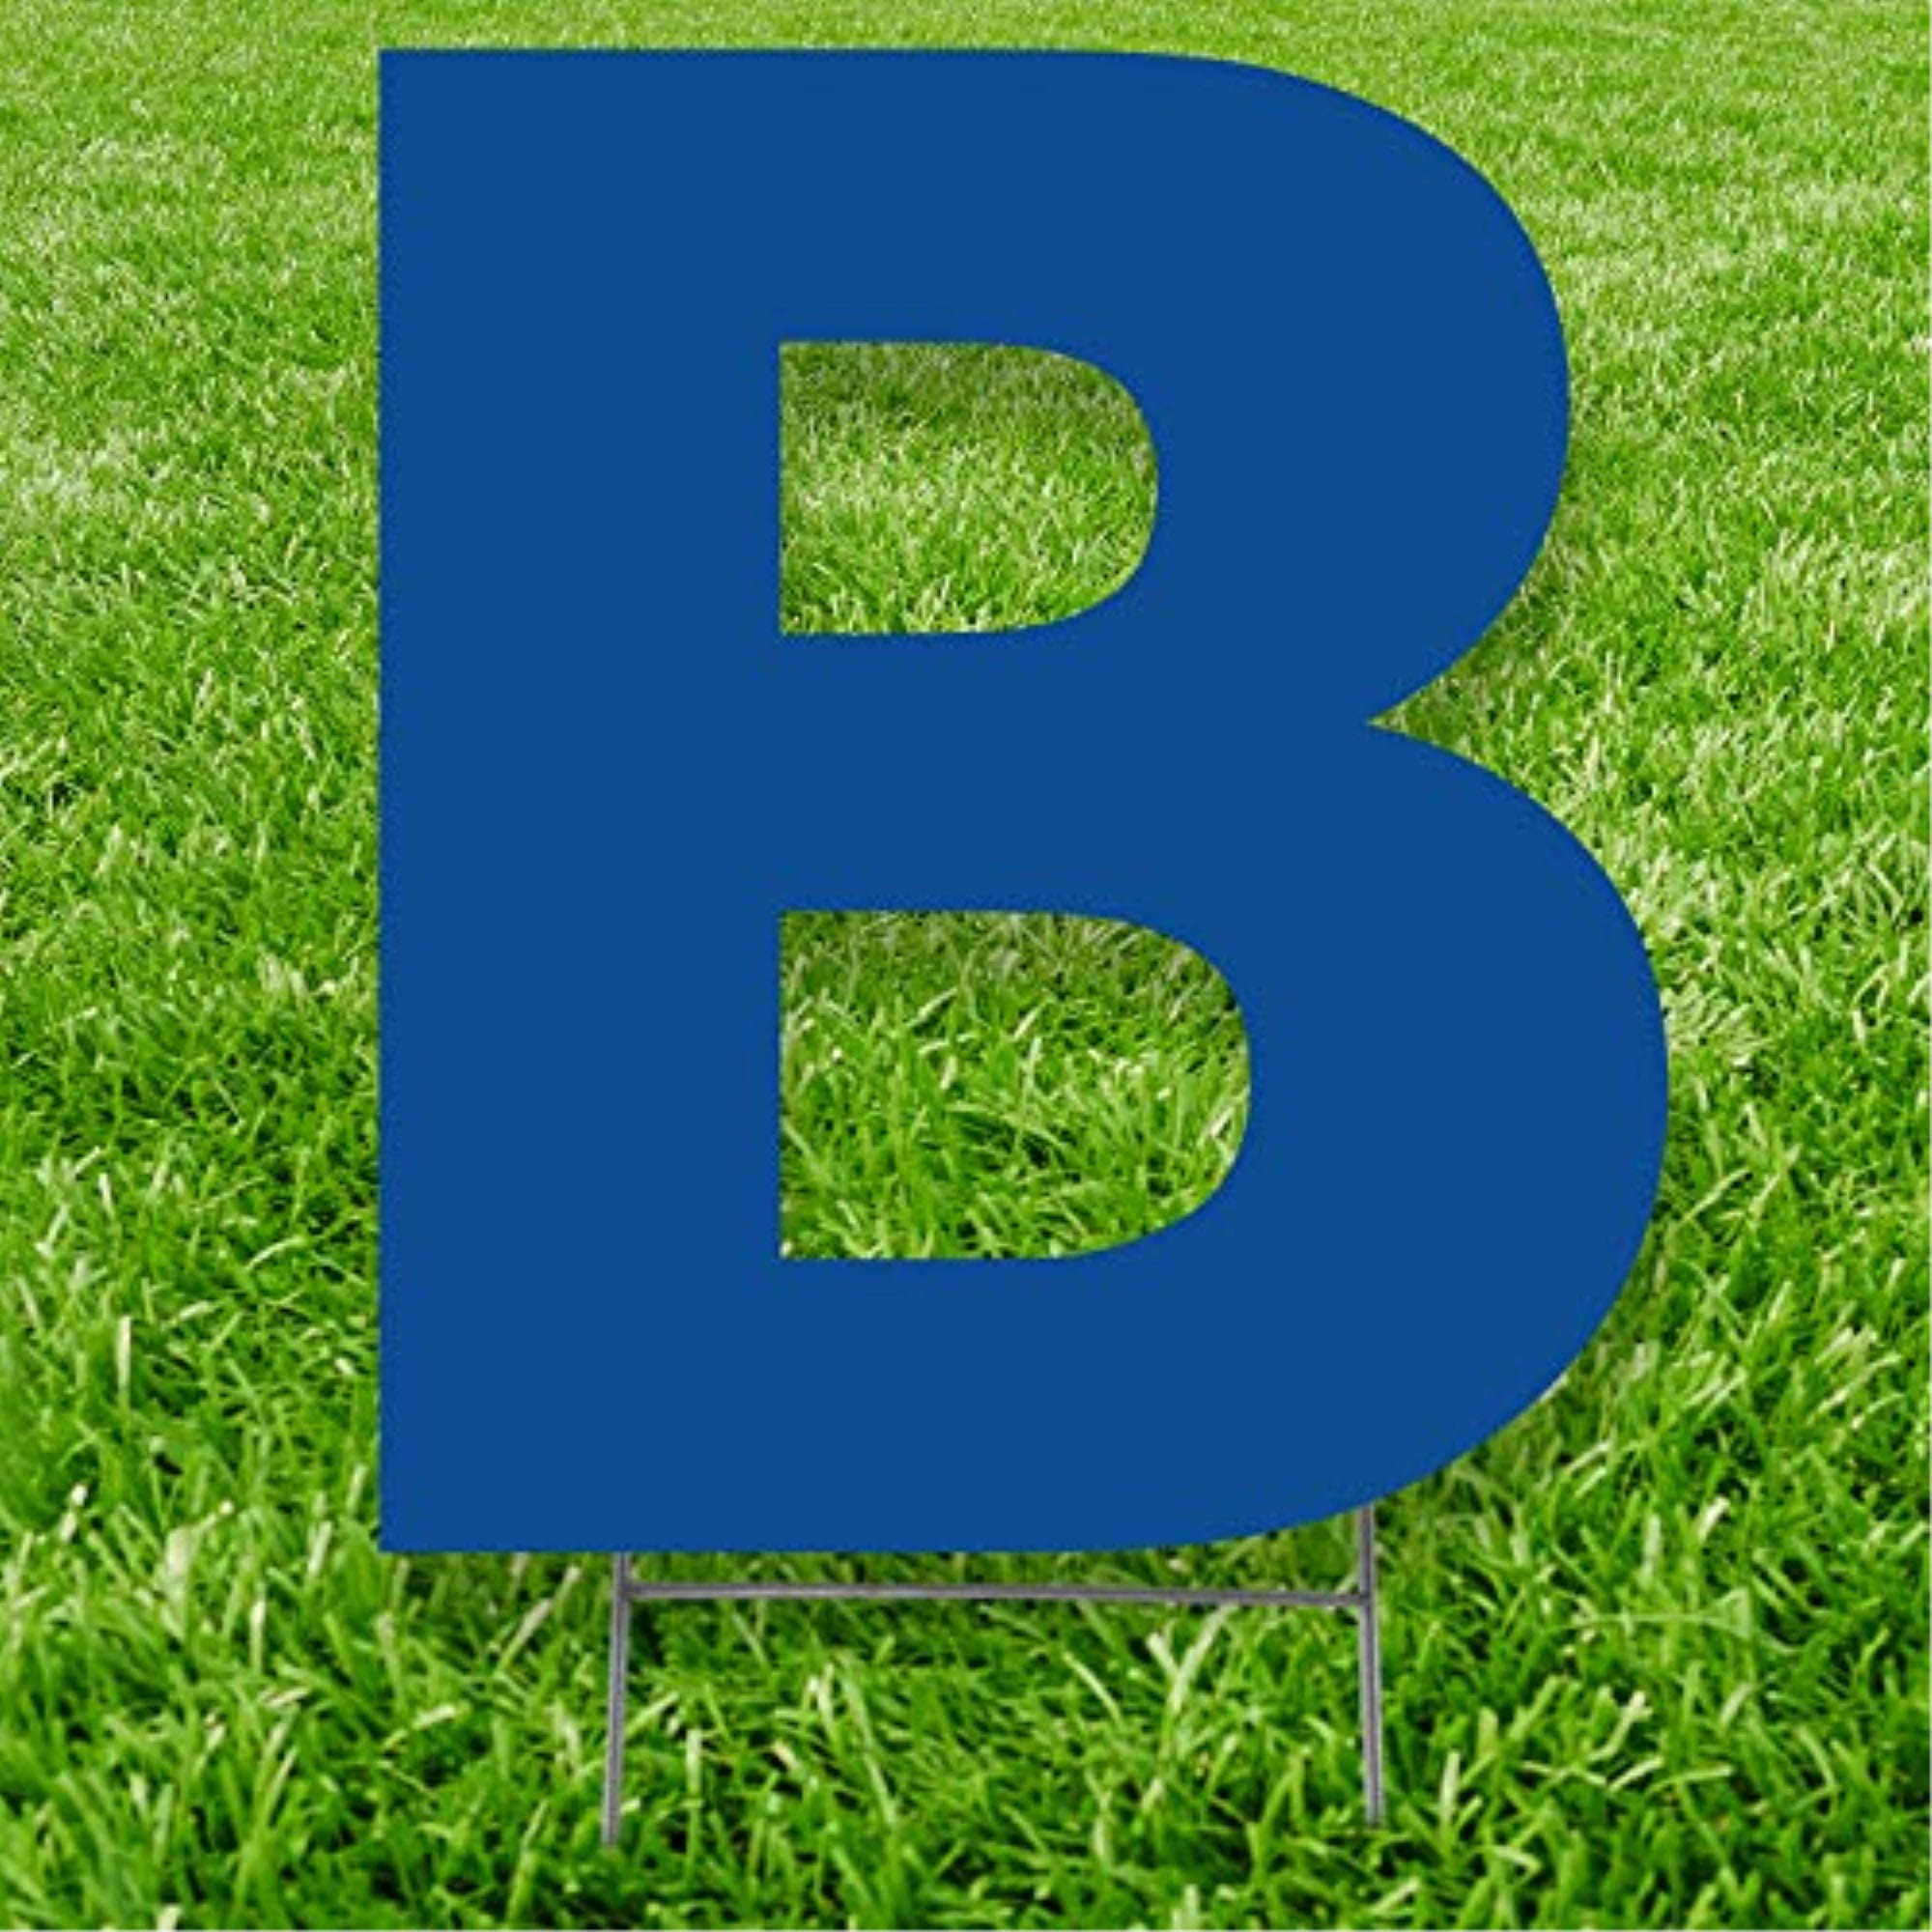 Advanced Graphics 3282 20 x 15 in. Letter B Yard Sign, Blue